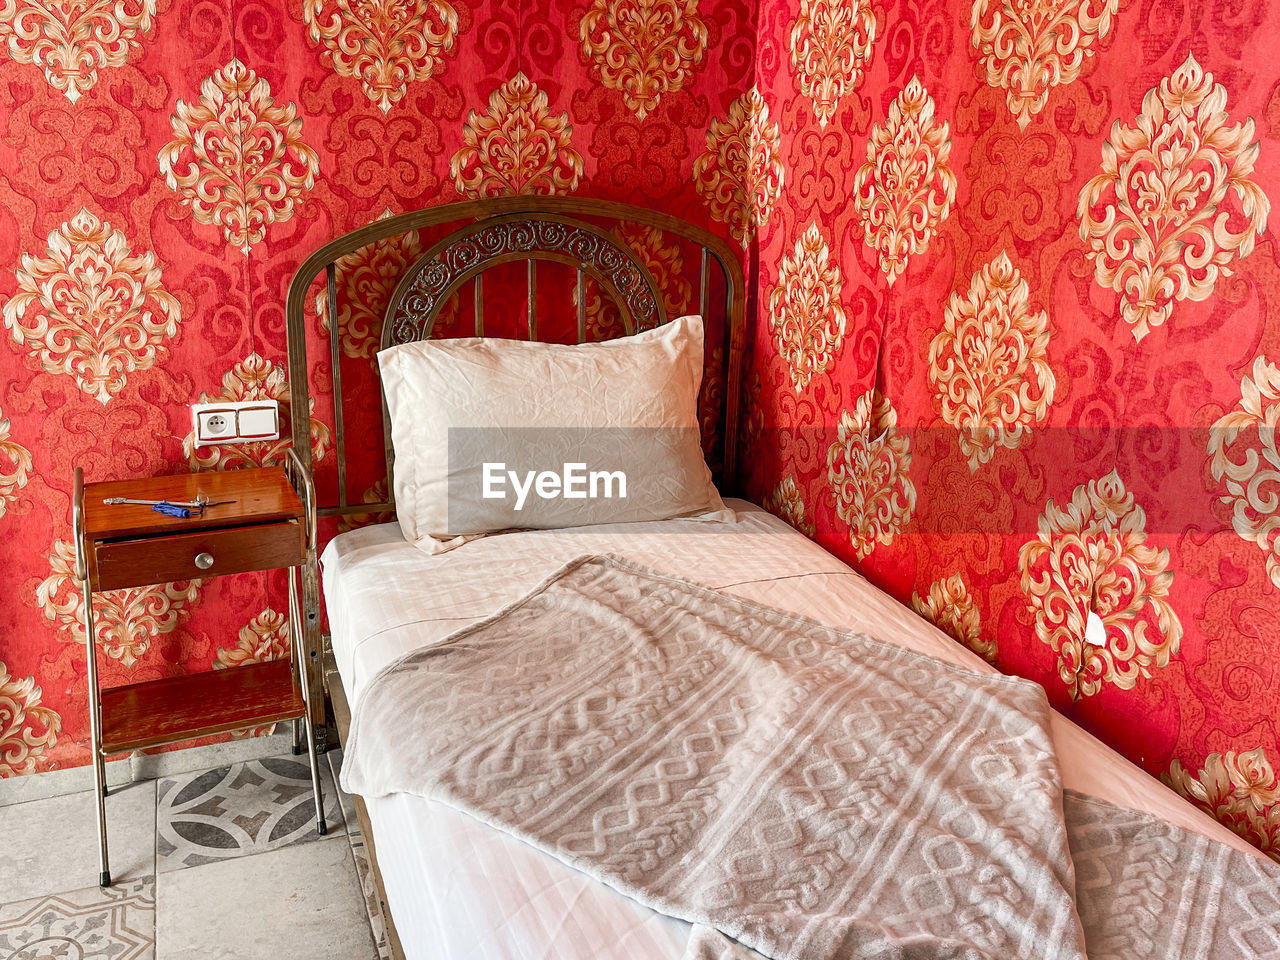 furniture, pattern, bed, pillow, red, bed sheet, indoors, bedroom, textile, no people, room, domestic room, home interior, cushion, comfortable, floral pattern, wealth, stuffed, luxury, architecture, wall - building feature, cozy, relaxation, linen, wallpaper, interior design, carpet, home showcase interior, sheet, decoration, ornate